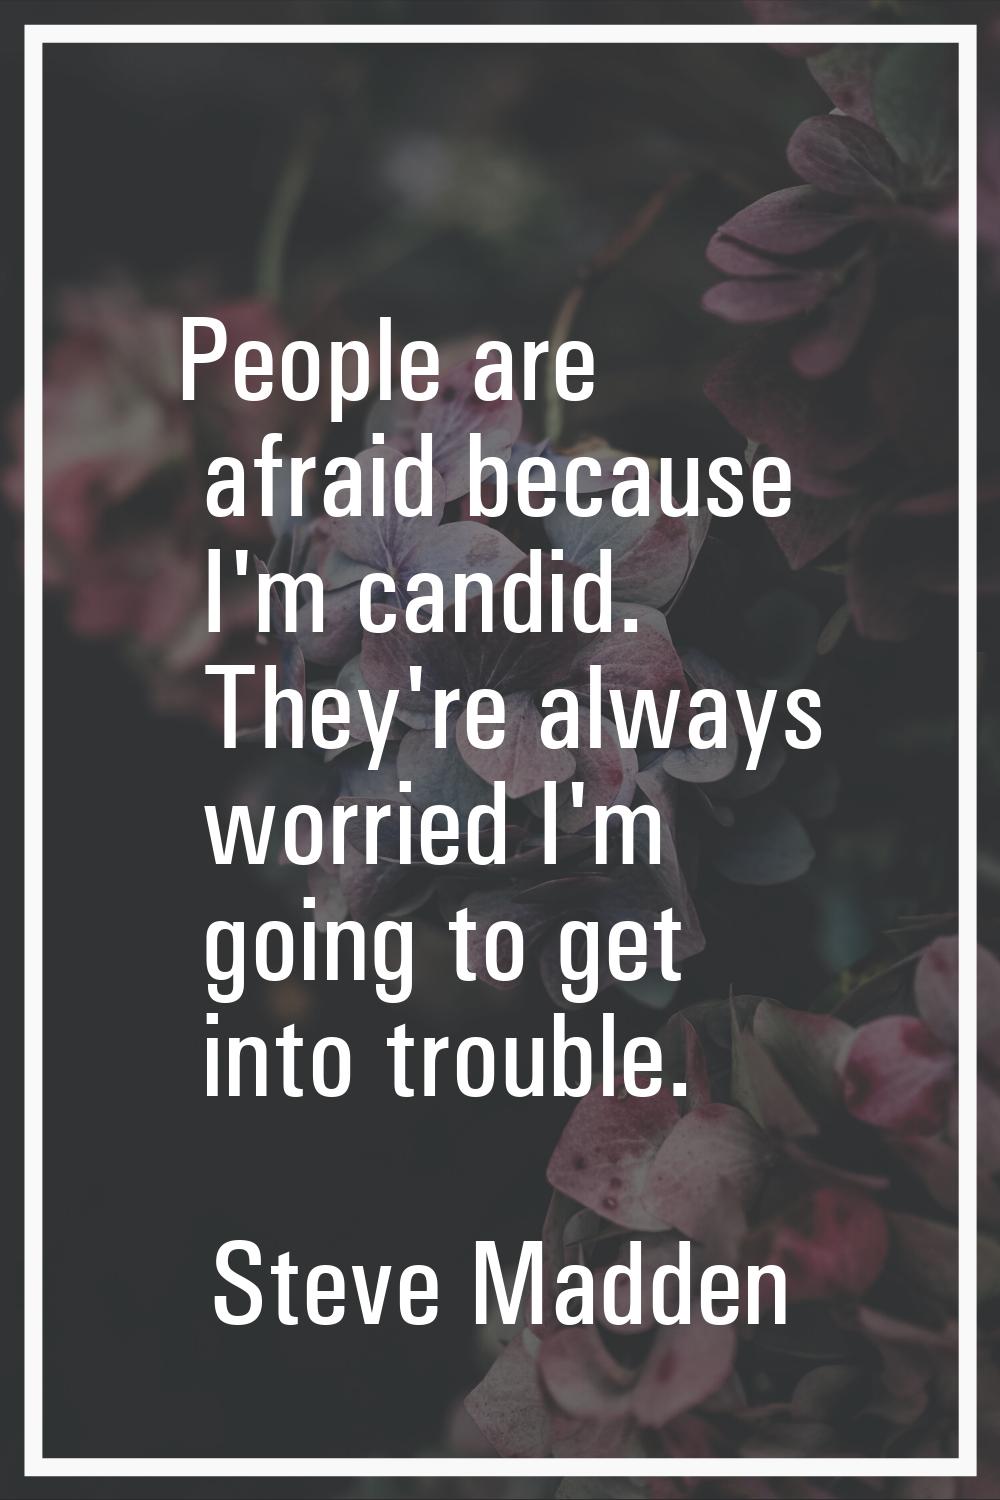 People are afraid because I'm candid. They're always worried I'm going to get into trouble.